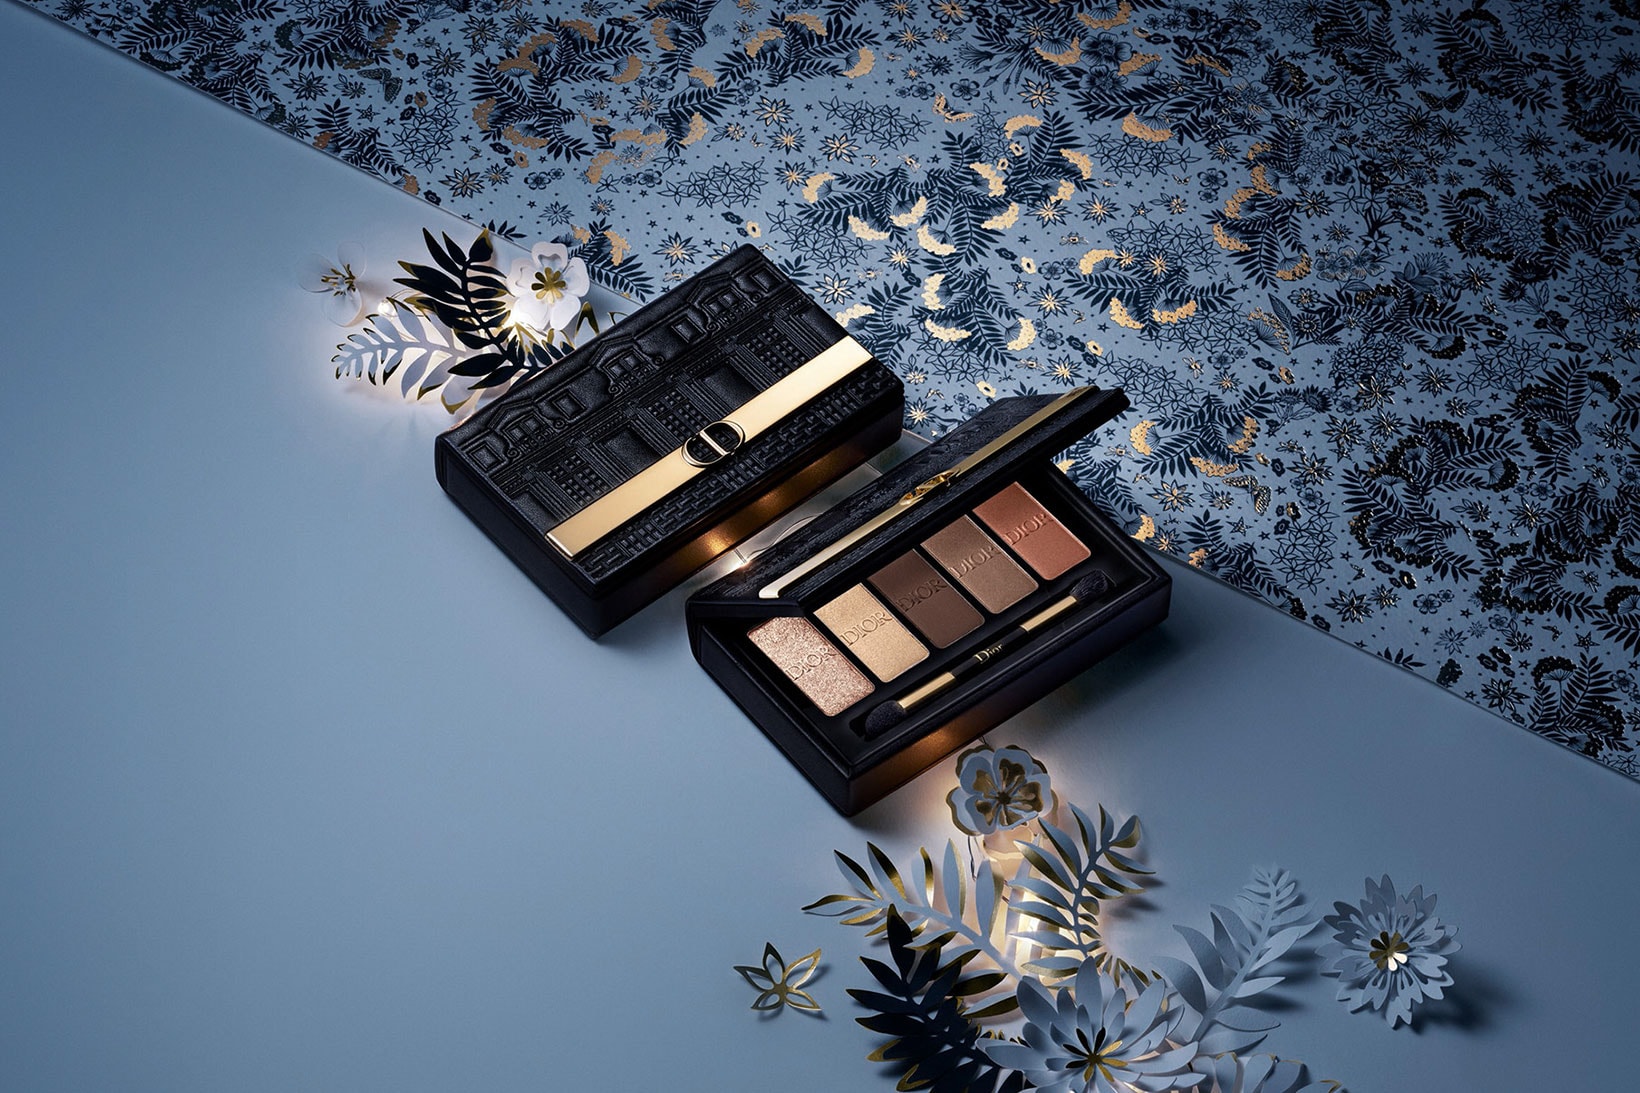 Dior Beauty Makeup Holiday Christmas Collection Eyeshadow Palette